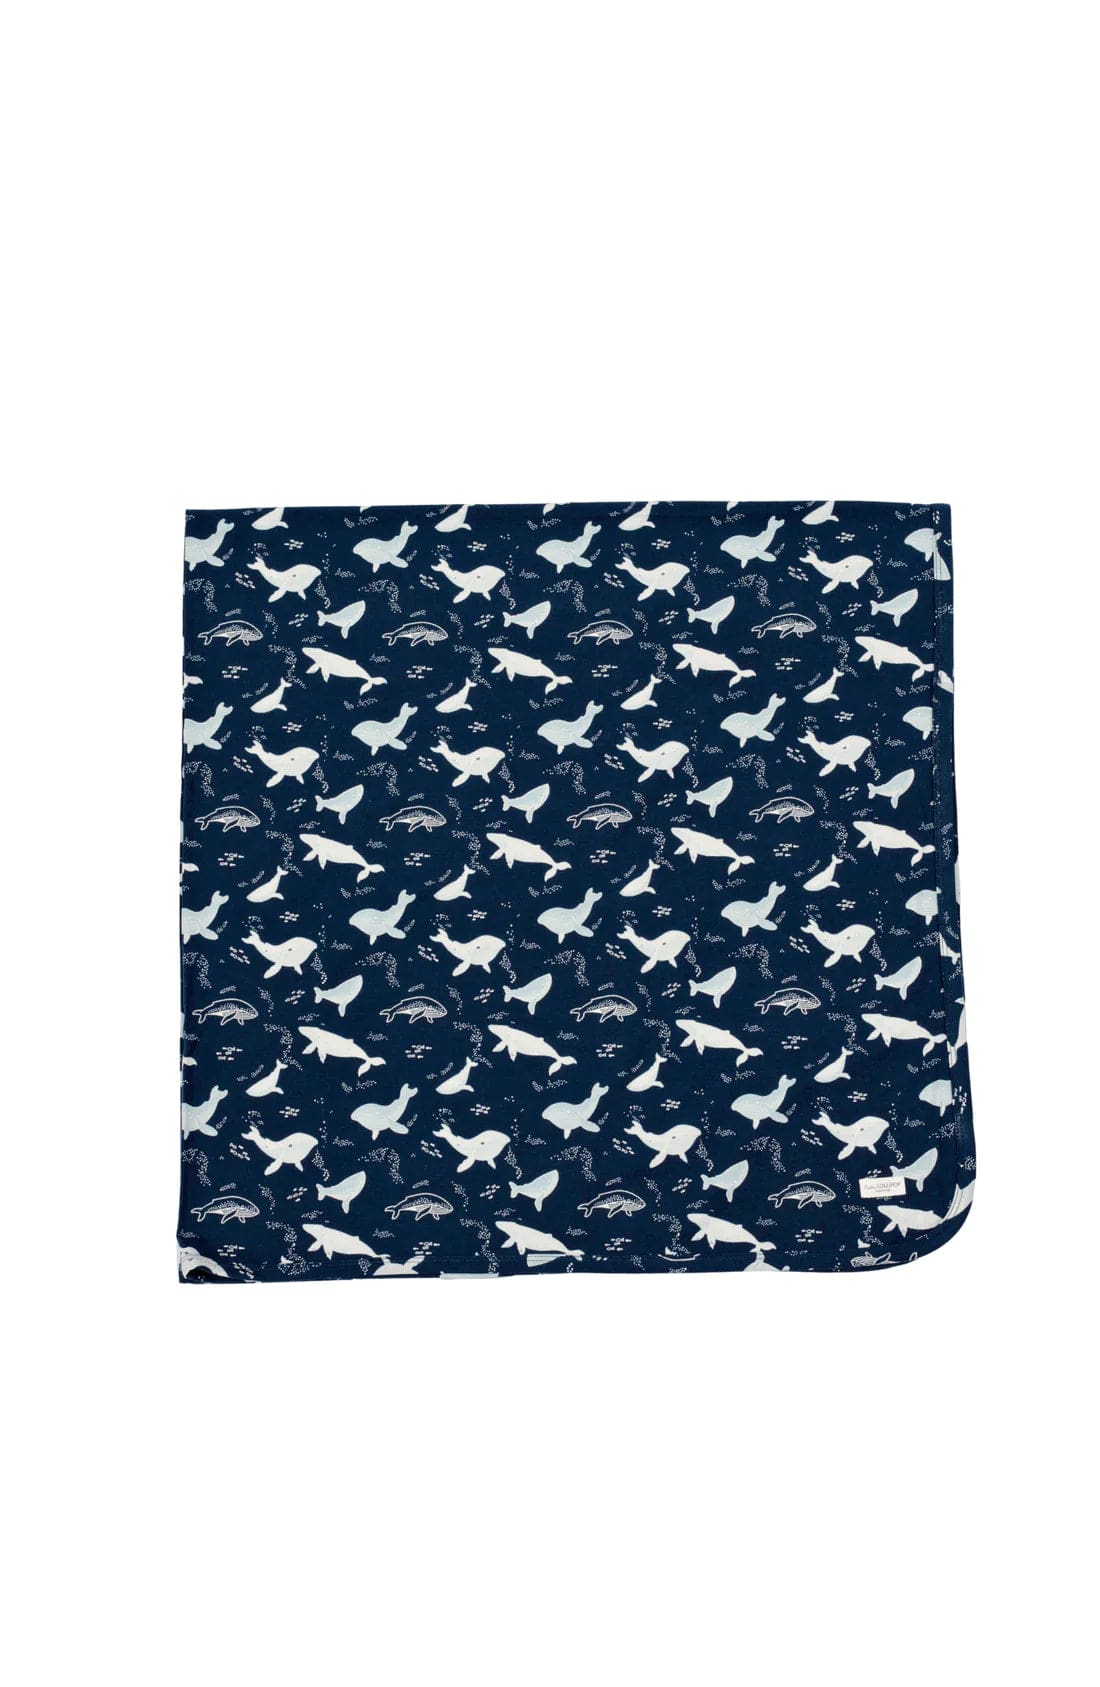 Stretch Knit Blanket - Whales LouLou Lollipop Lil Tulips